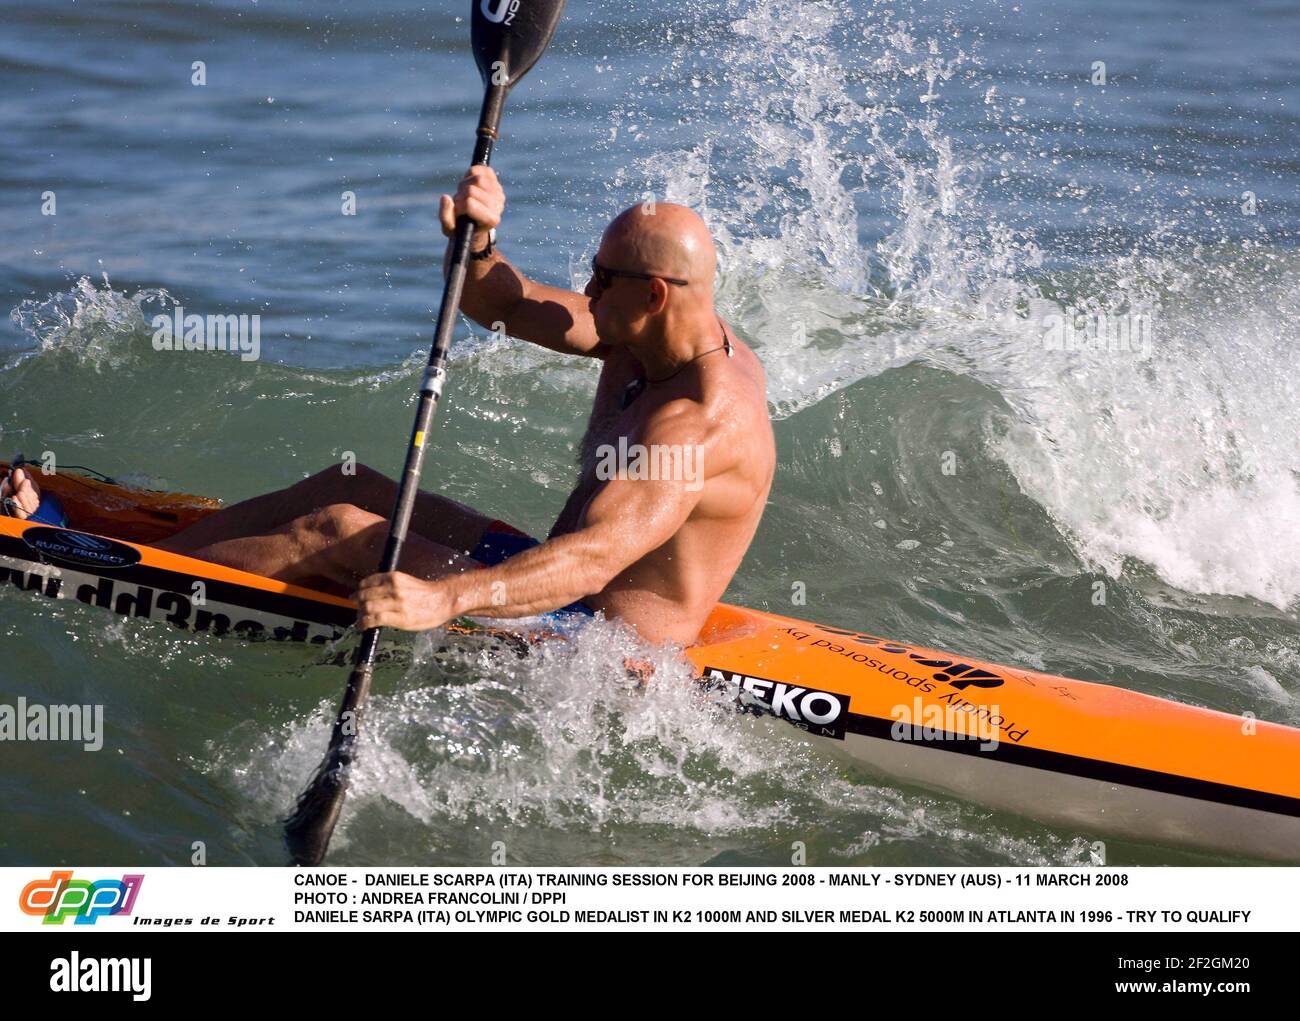 Sydney Manly Kayak High Resolution Stock Photography and Images - Alamy